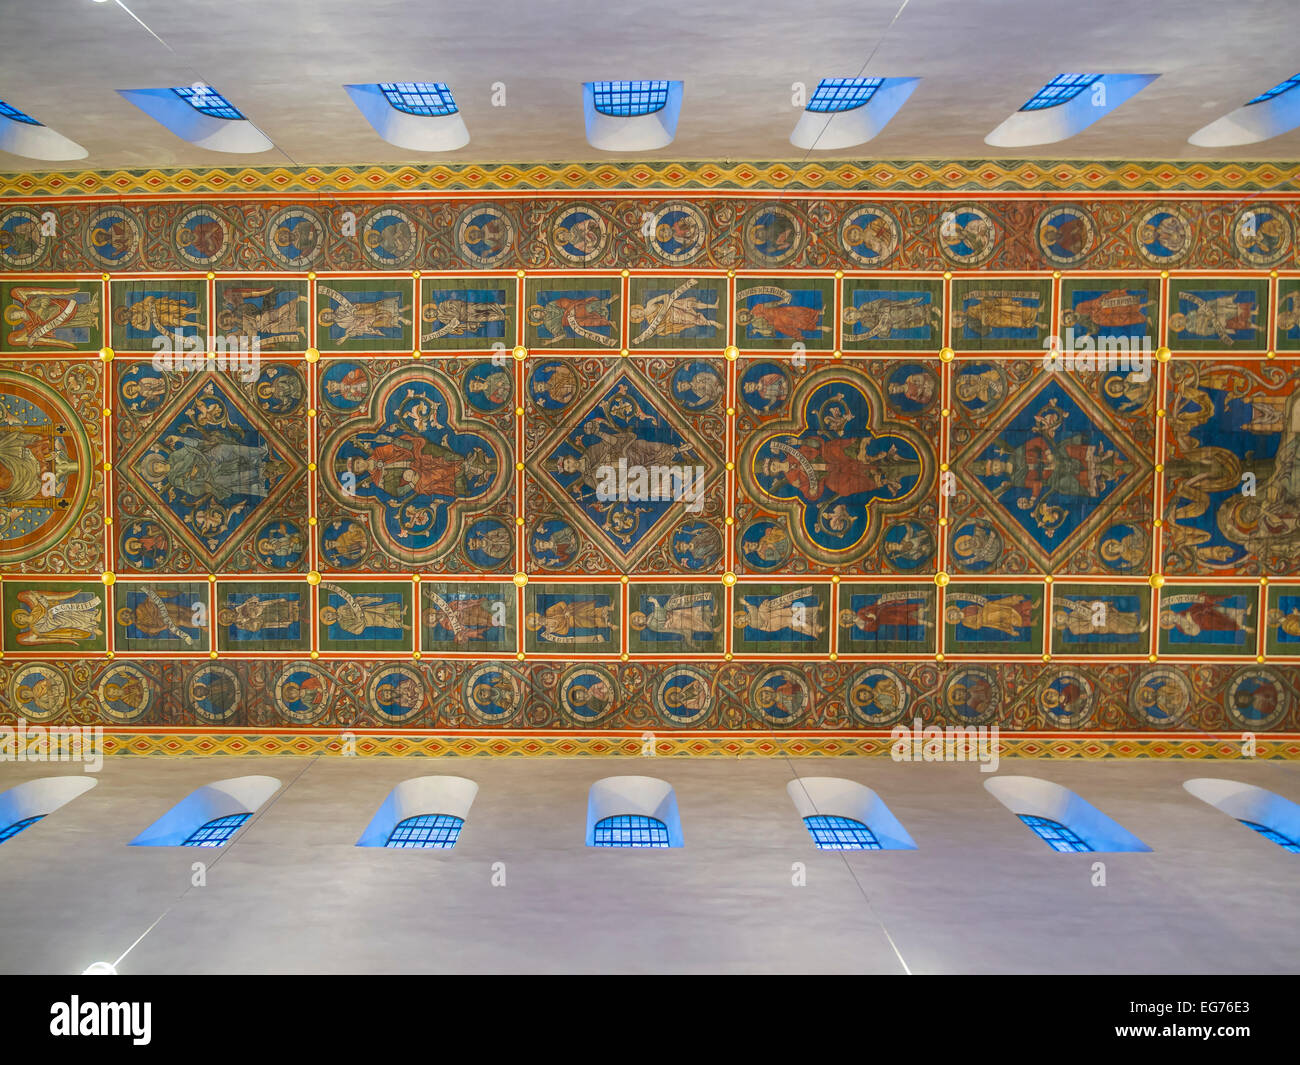 Germany, Hildesheim, wooden ceiling of St Michael's Church Stock Photo